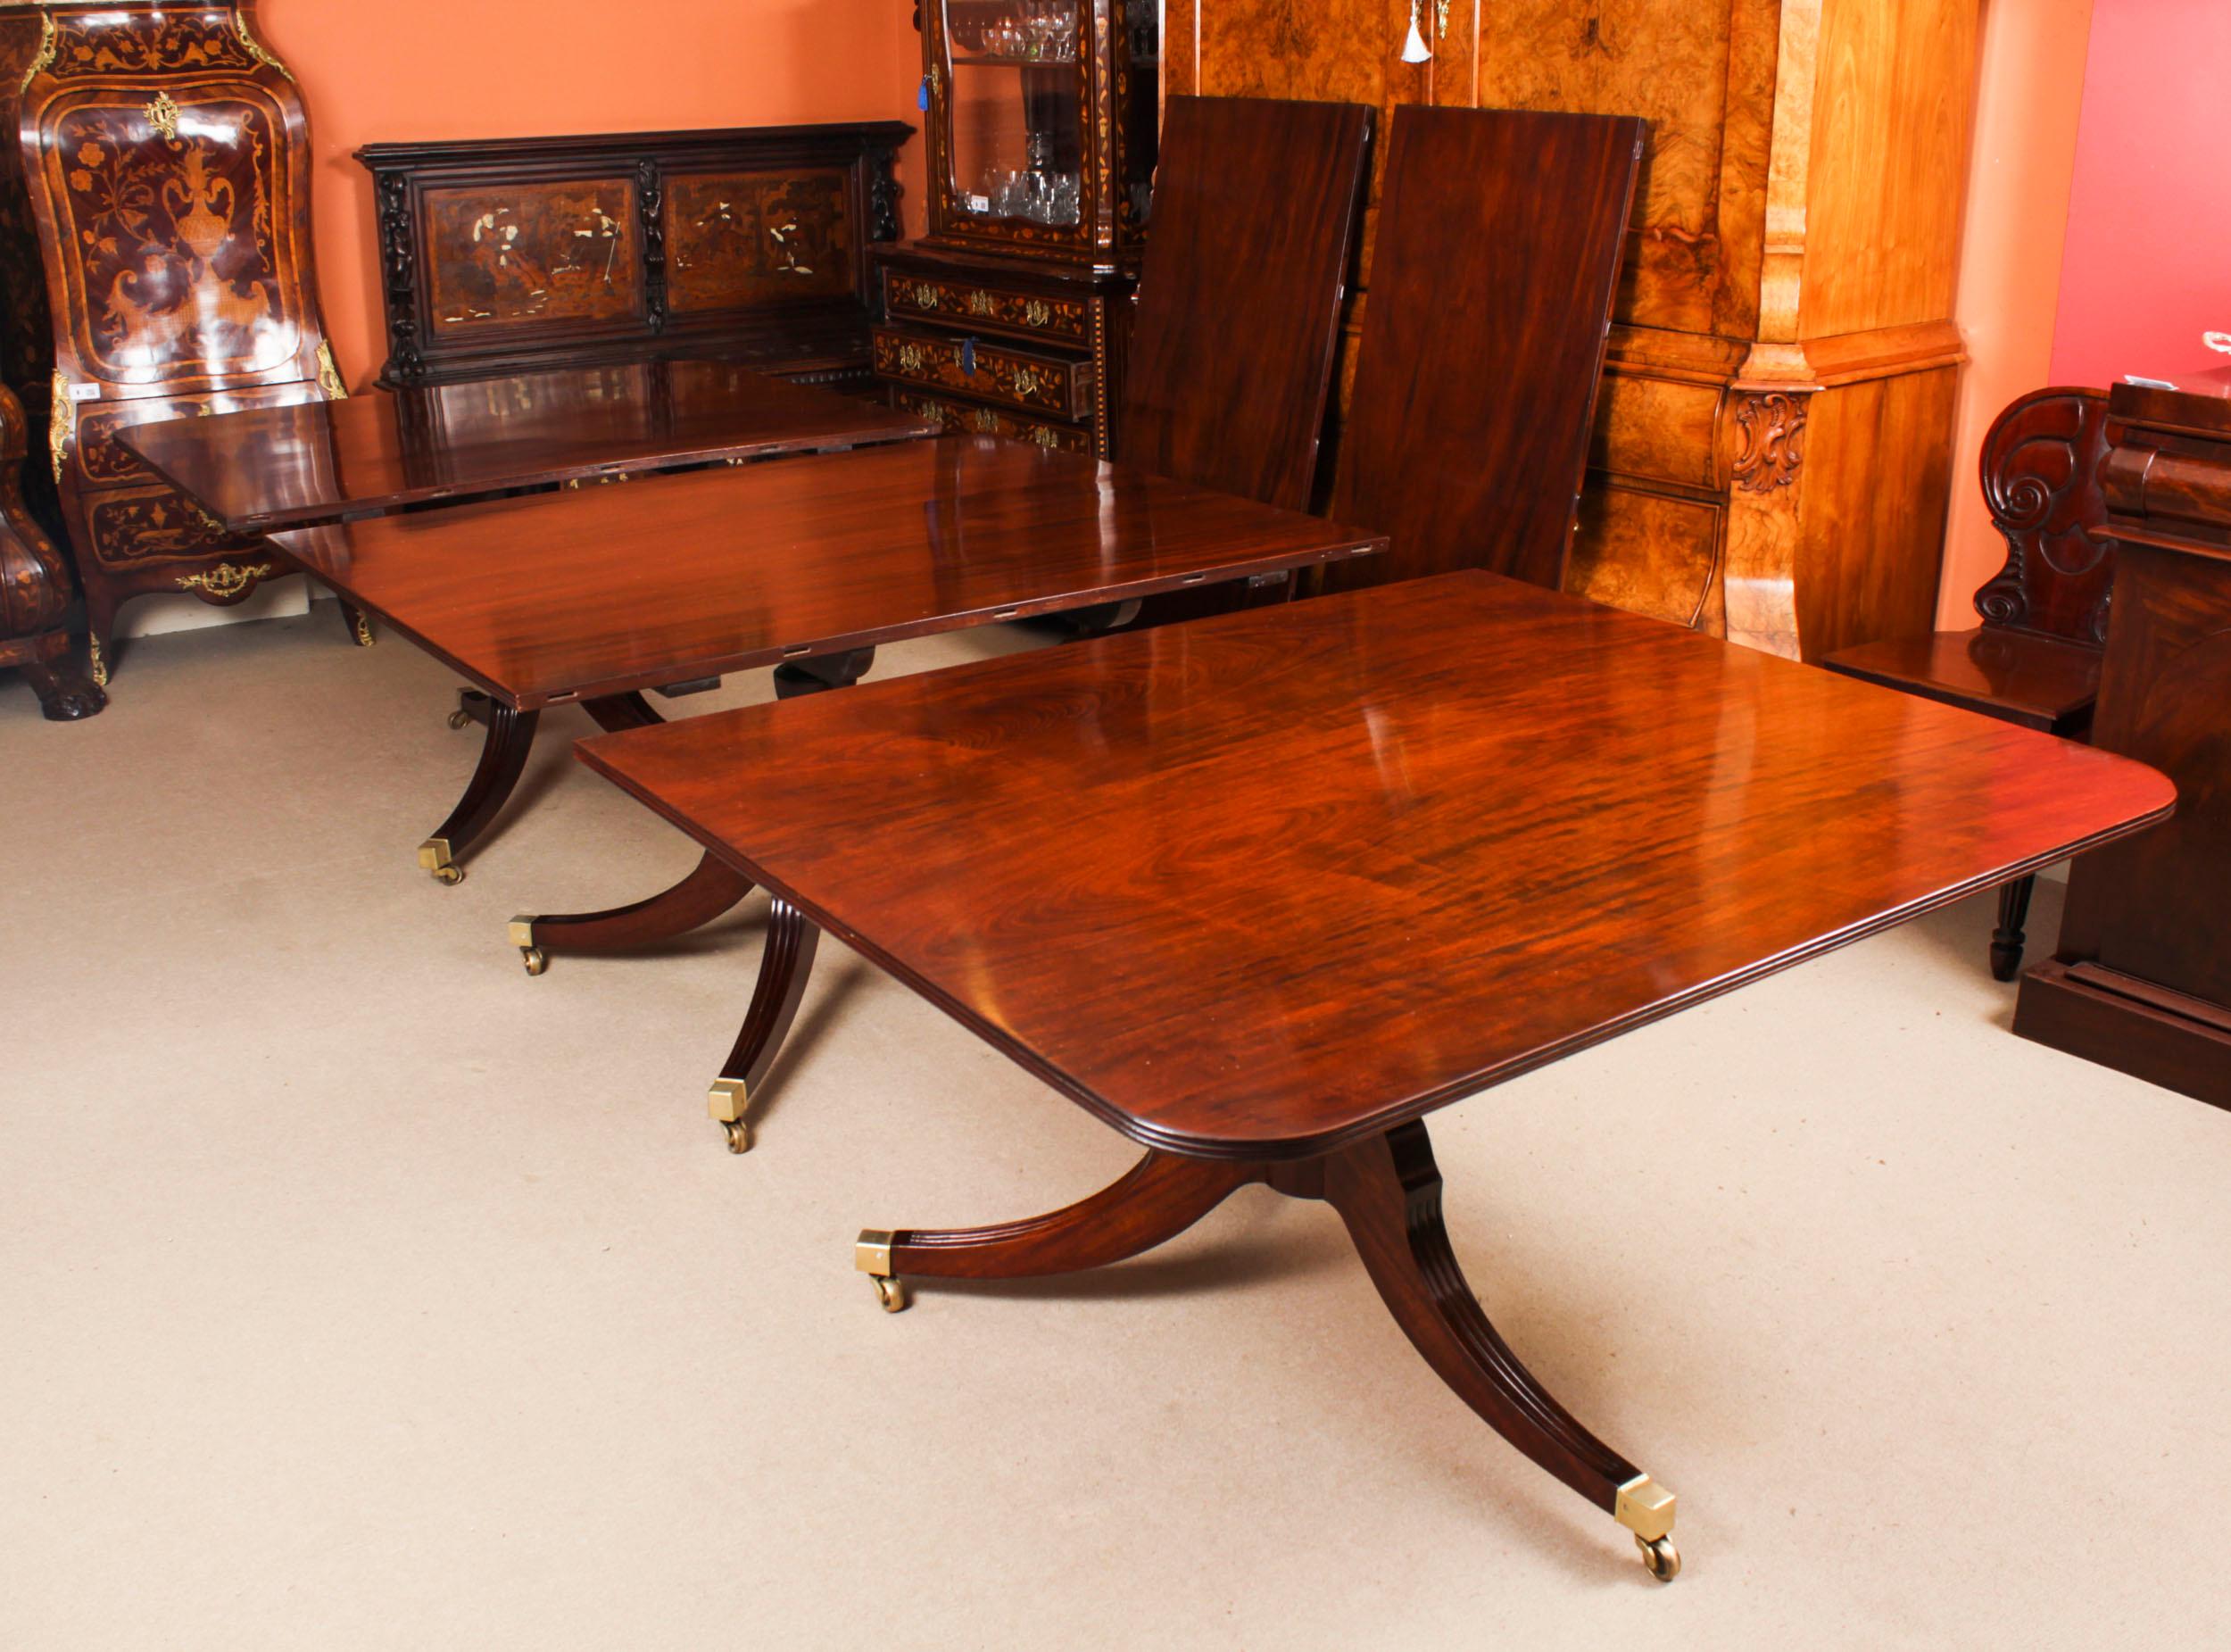 Antique 14ft Flame Mahogany Regency Revival Triple Pillar Dining Table 19th C For Sale 2